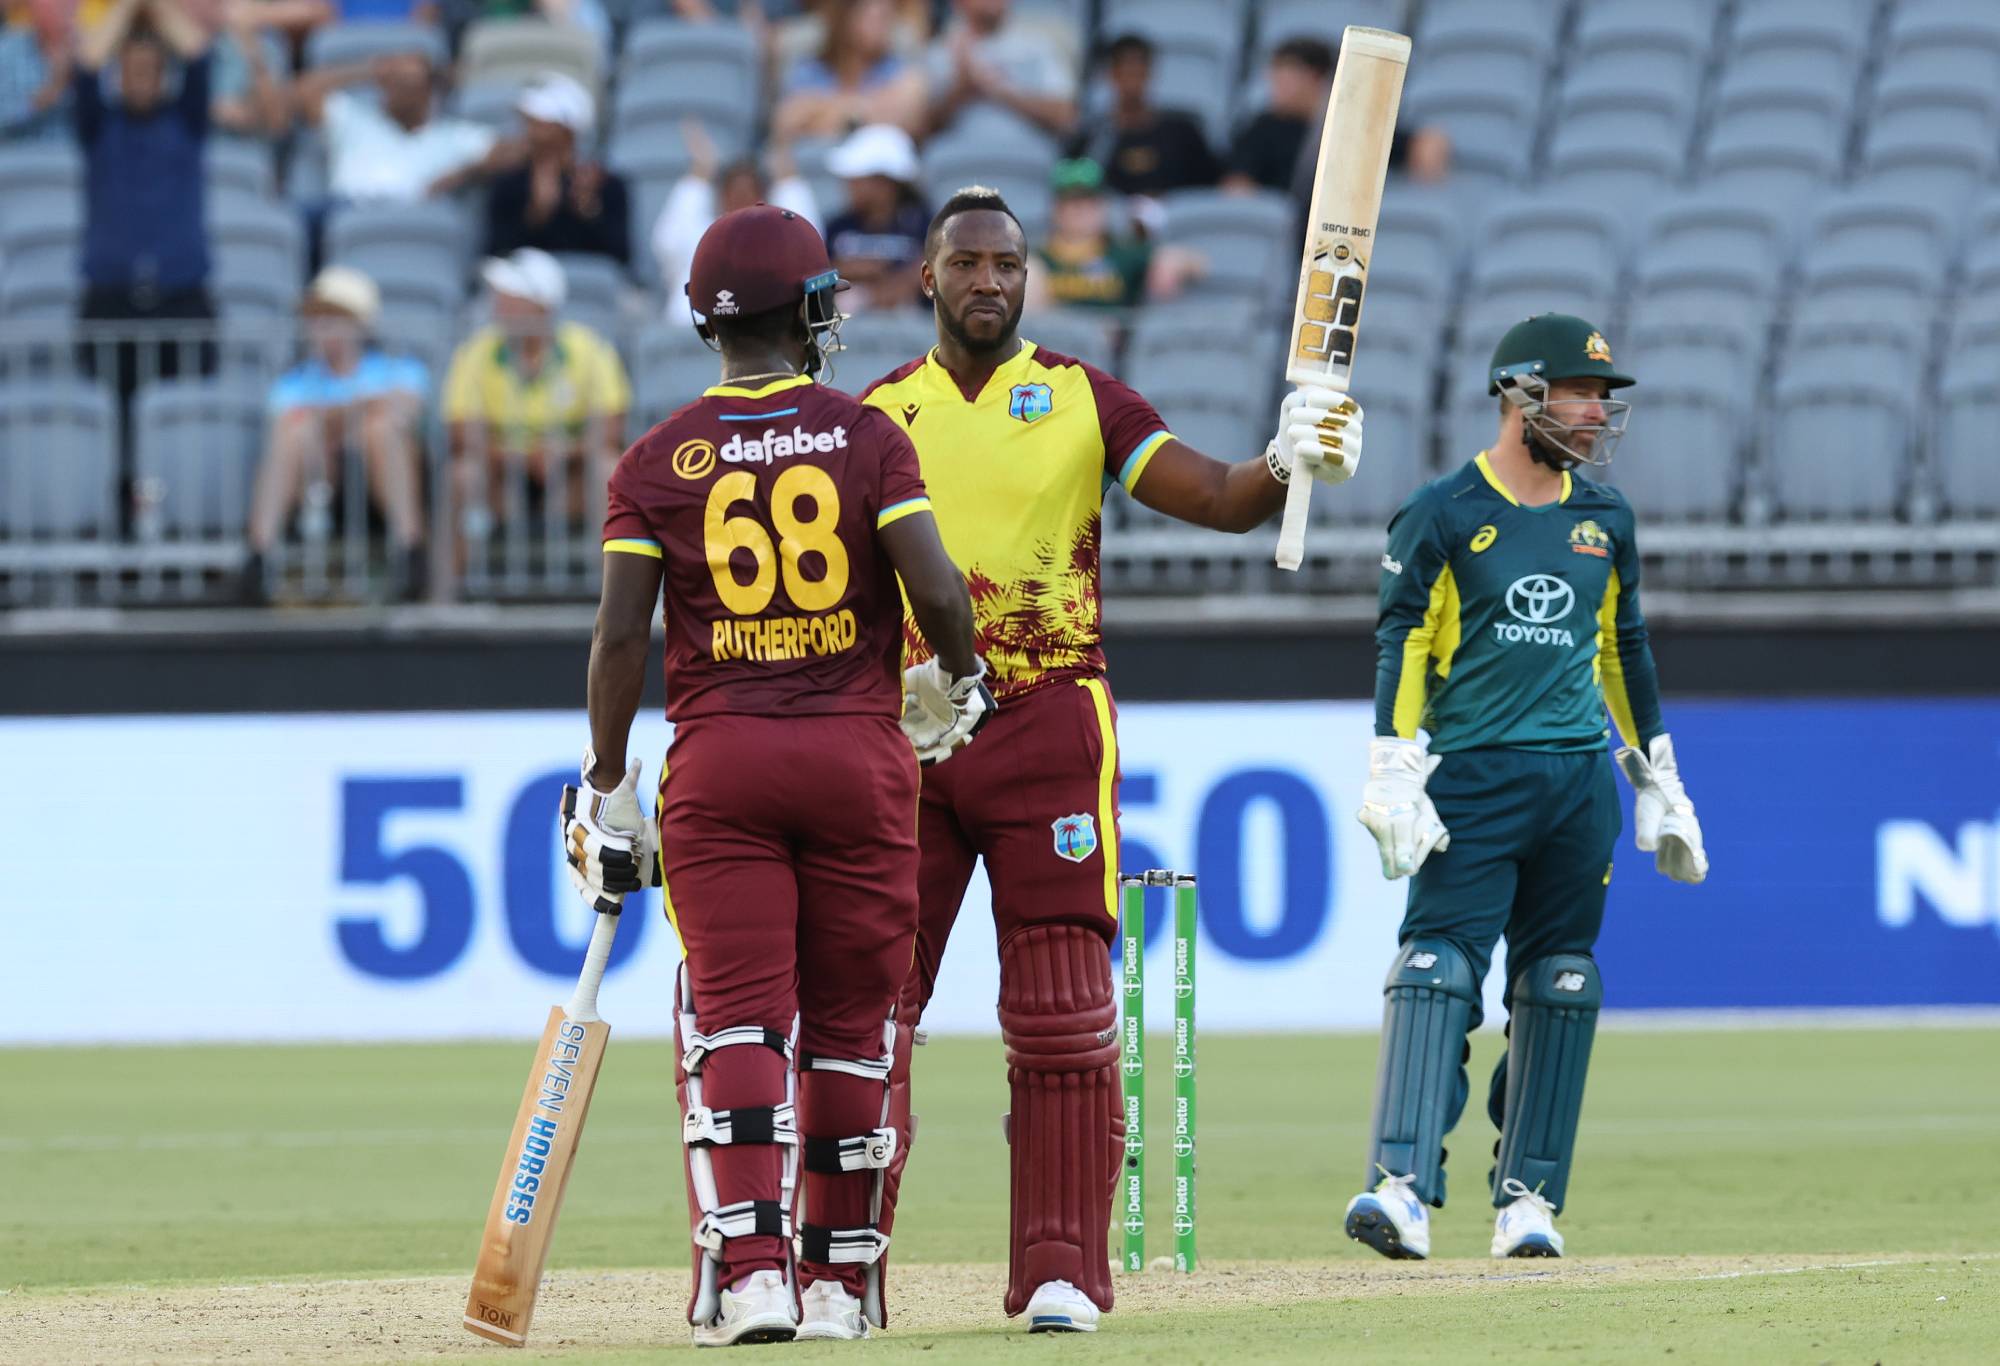 PERTH, AUSTRALIA - FEBRUARY 13: Andre Russell of the West Indies raises his bat after scoring fifty runs during game three of the Men's T20 International series between Australia and West Indies at Optus Stadium on February 13, 2024 in Perth, Australia. (Photo by Will Russell - CA/Cricket Australia via Getty Images)